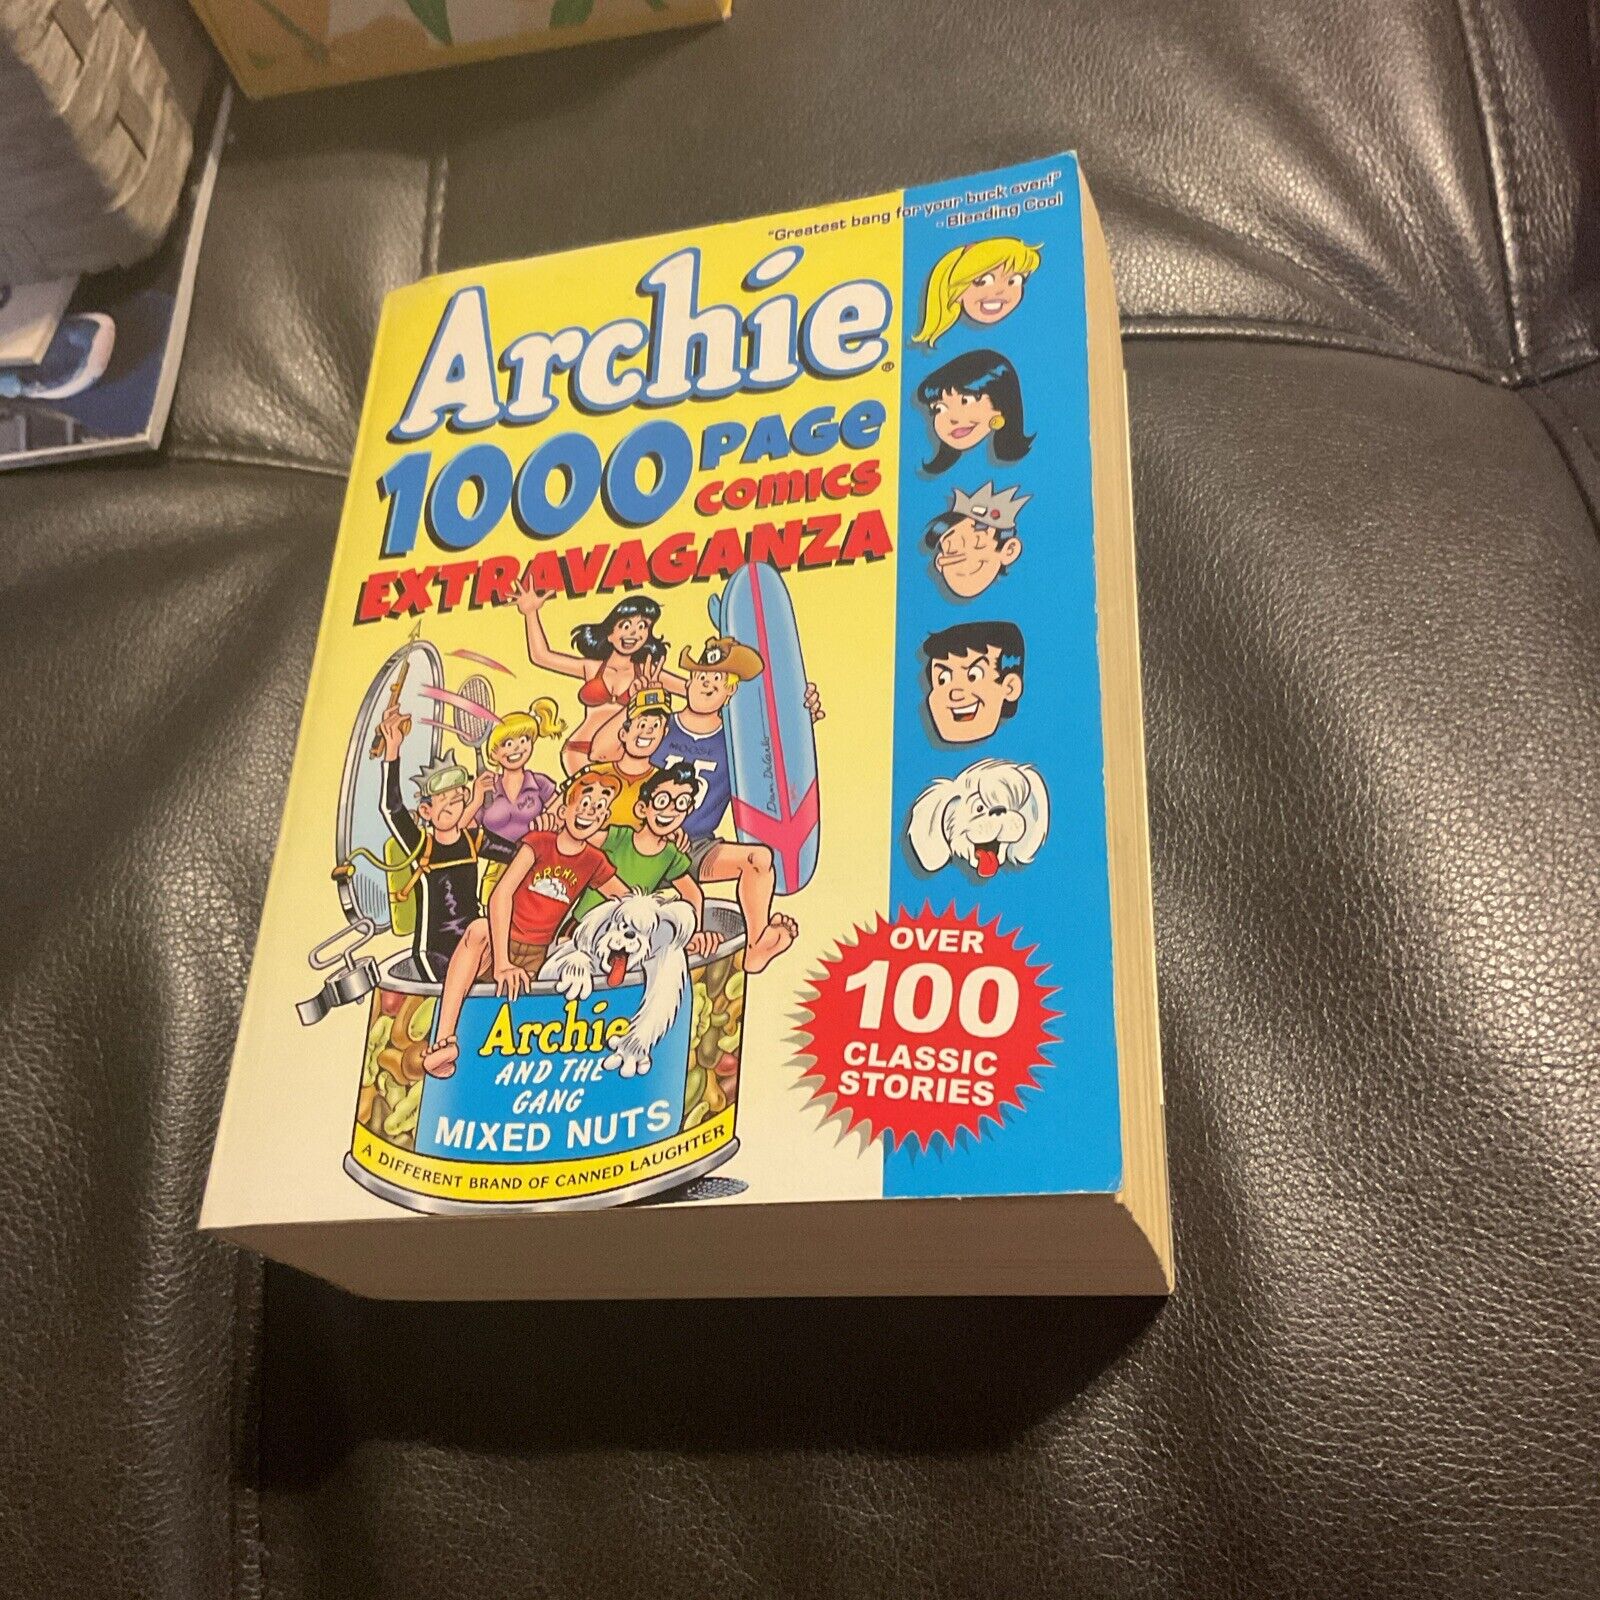 Archie 1000 Page Comics Extravaganza VF-NM 2013 Combined Shipping